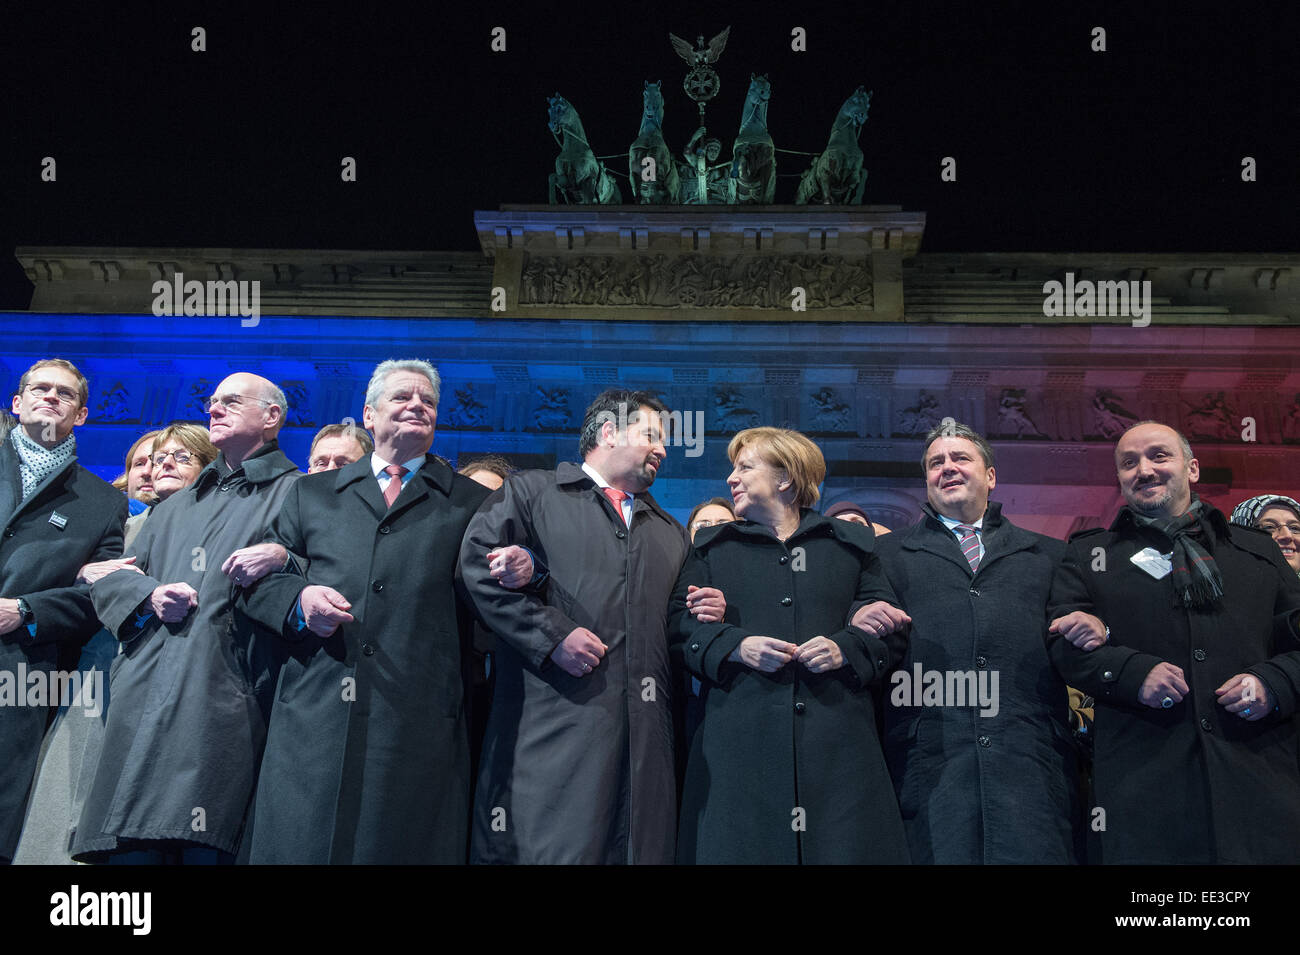 Berlin, Germany. 13th Jan, 2015. Mayor of Berlin Michael Mueller, (L-R) President of the Bundestag, Norbert Lammer, German President Joachim Gauck, chairman of the Central Committee of Muslims in Germany, Aiman Mazyek, Chancellor Angela Merkel, Minister of Economic Affairs Sigmar Gabirel, and the chairman of the Turkish Community in Berlin, Bekir Yilmaz, attend a vigil for the victims of the attacks in France at the Brandenburg Gate in Berlin, Germany, 13 January 2015. The Central Committee of Muslims and the Turkish community have invoked the slogan 'Stand together - Show face' for the rally. Stock Photo